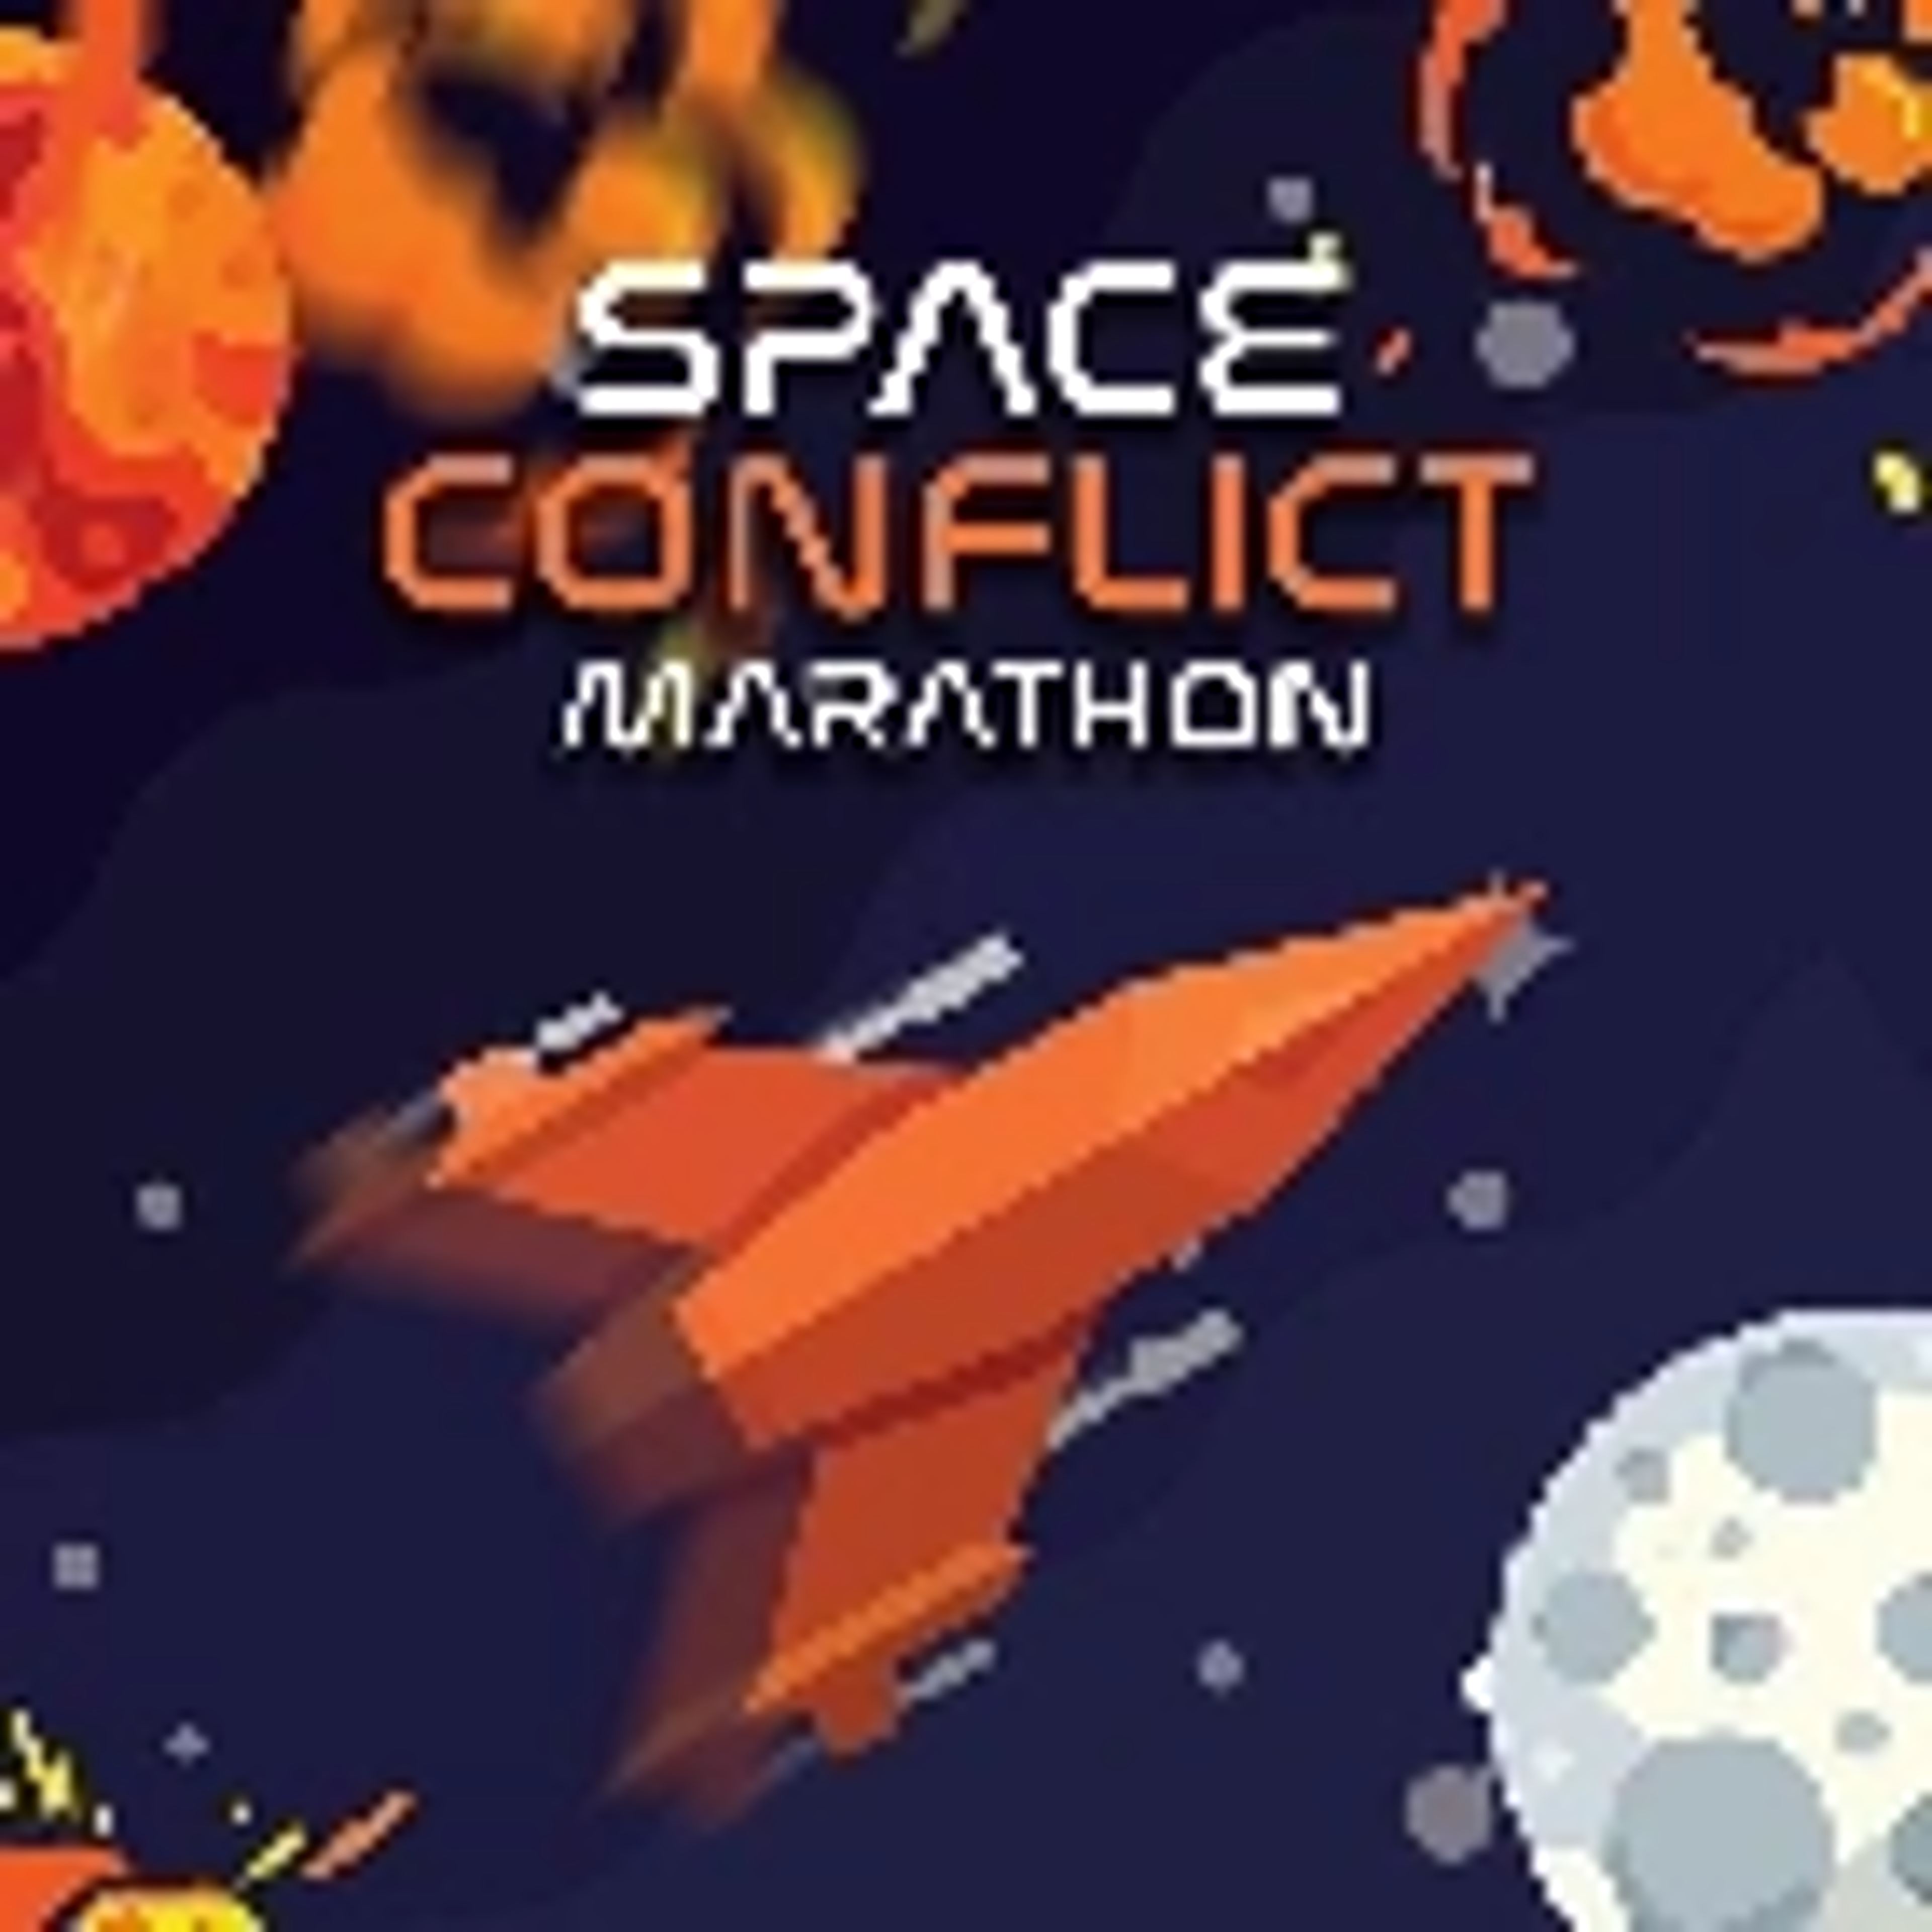 Space Conflict